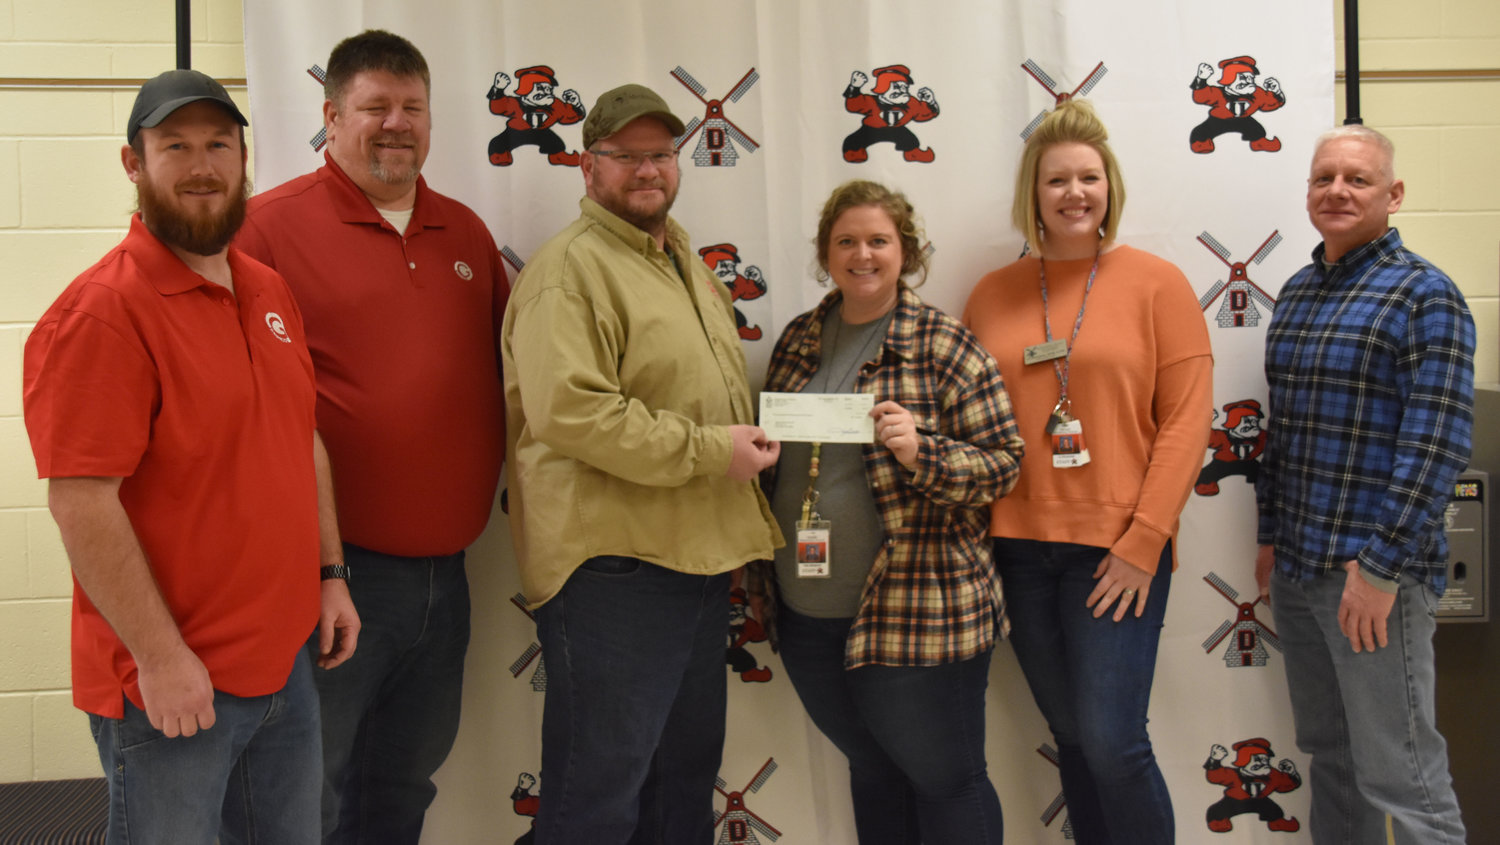 A donation from the Owensville Masonic Lodge 624 and Grimco to OMS School Lunch Relief in the amount of $4,500 was presented by to Sam Mangrum and Liz Buemmer. From left Grimco’s Shaun Christopher and Daniel Kleinheider, Masonic’s Cletus Rademacher, Mangrum, Buemmer, and Masonic’s John Behrens.